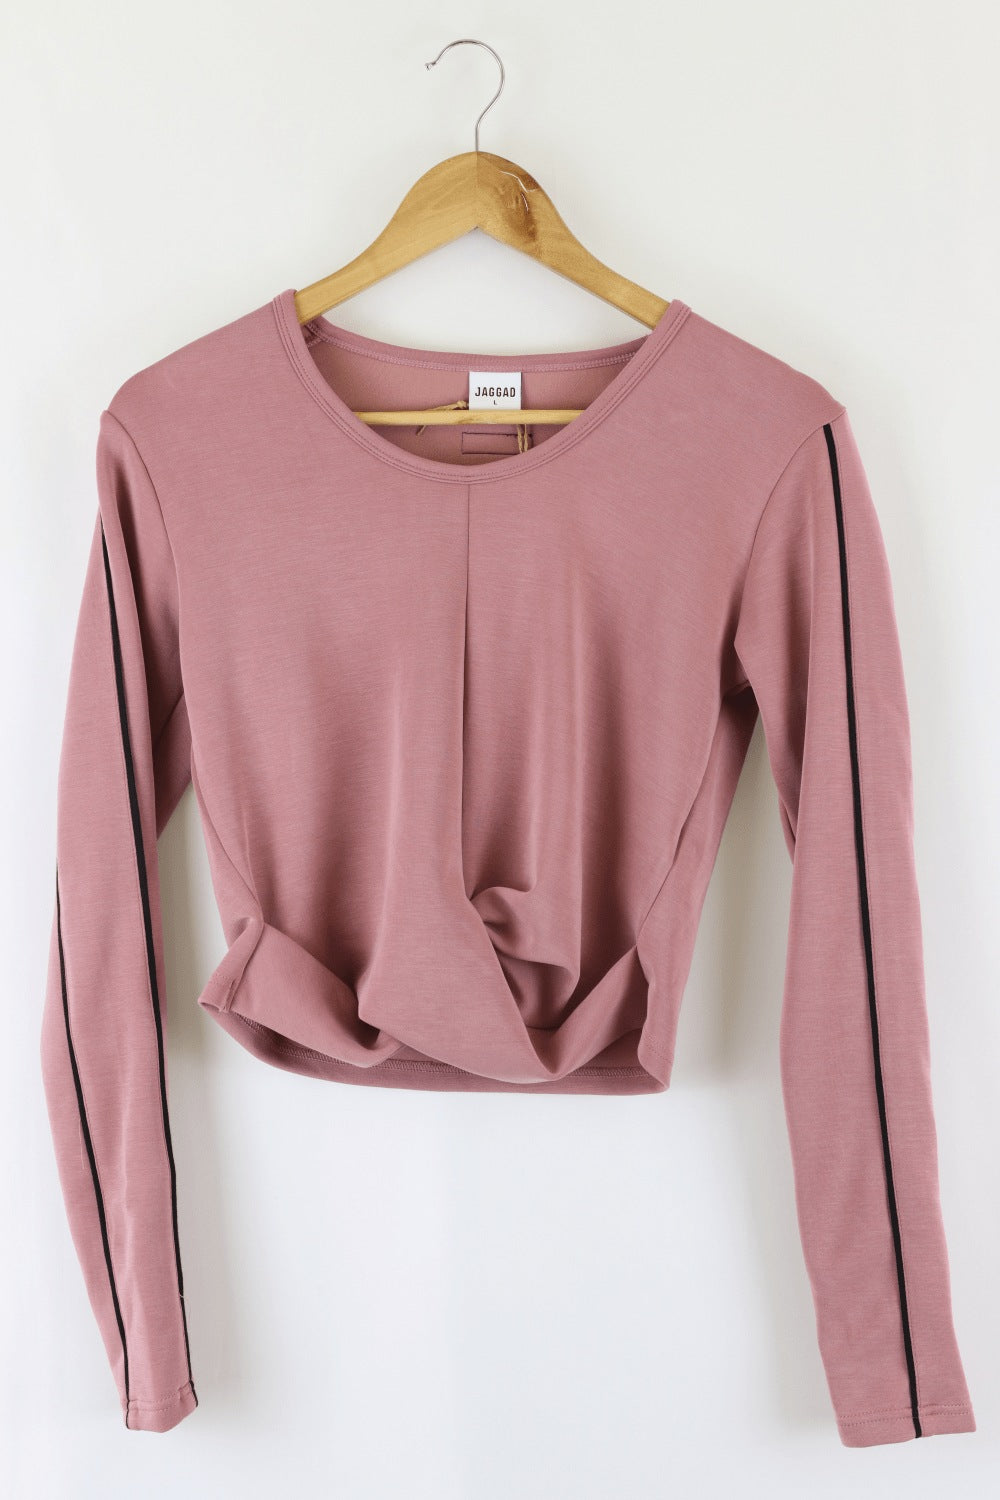 Jaggad Pink Long Sleeve Top L